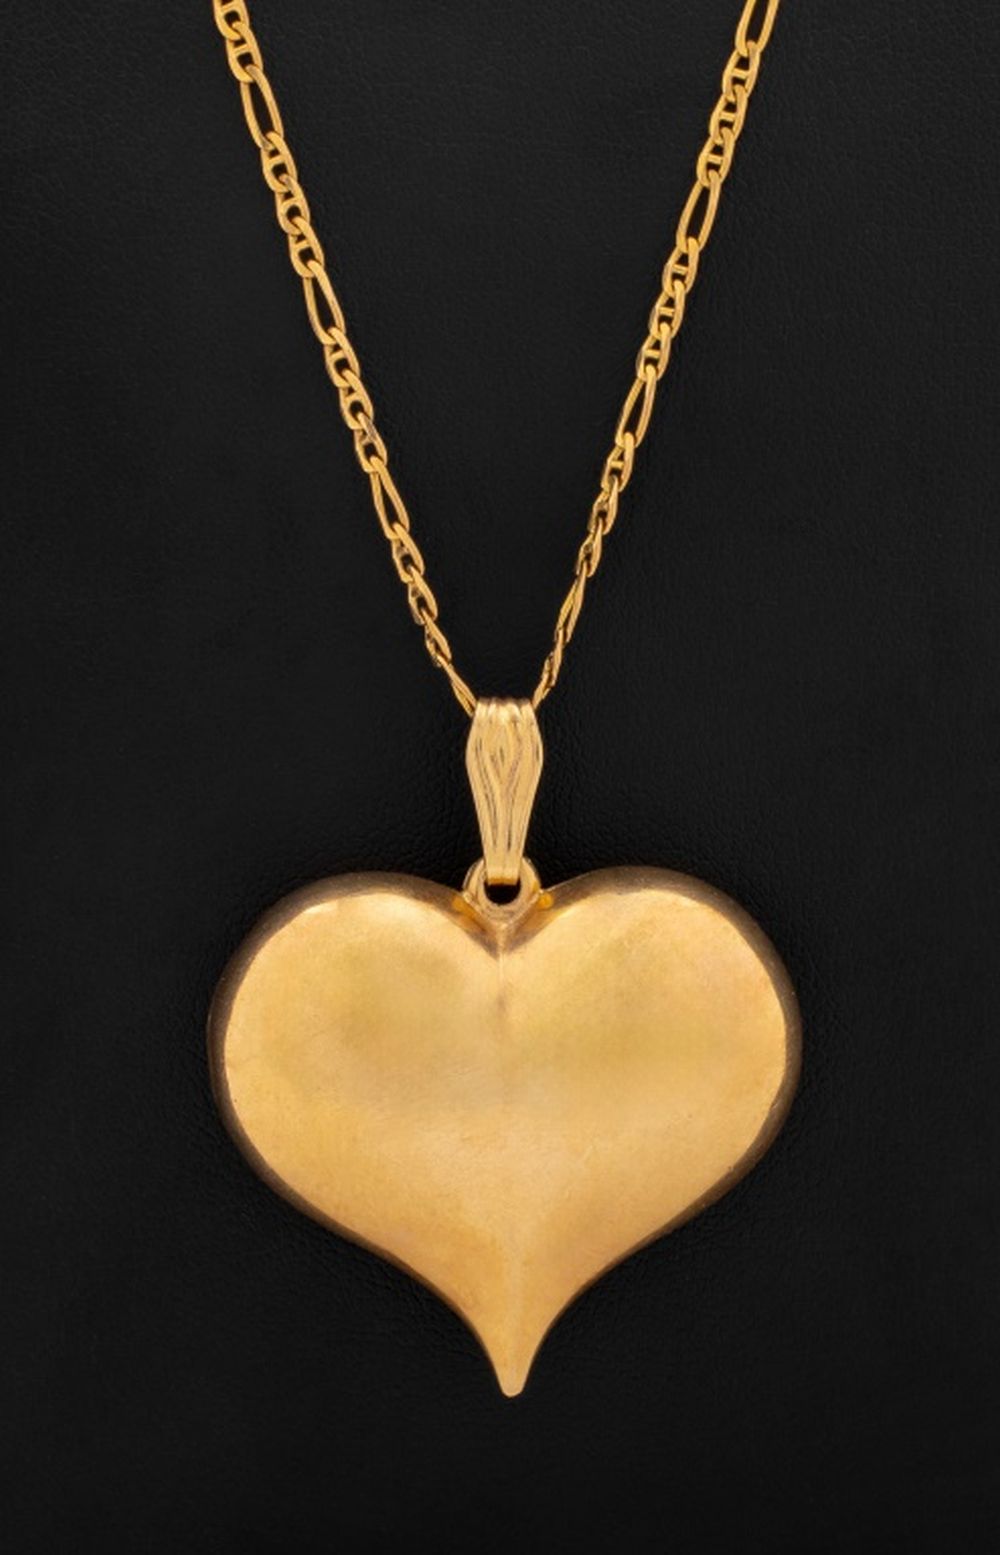 14K YELLOW GOLD HEART PENDANT NECKLACE 3ced7d